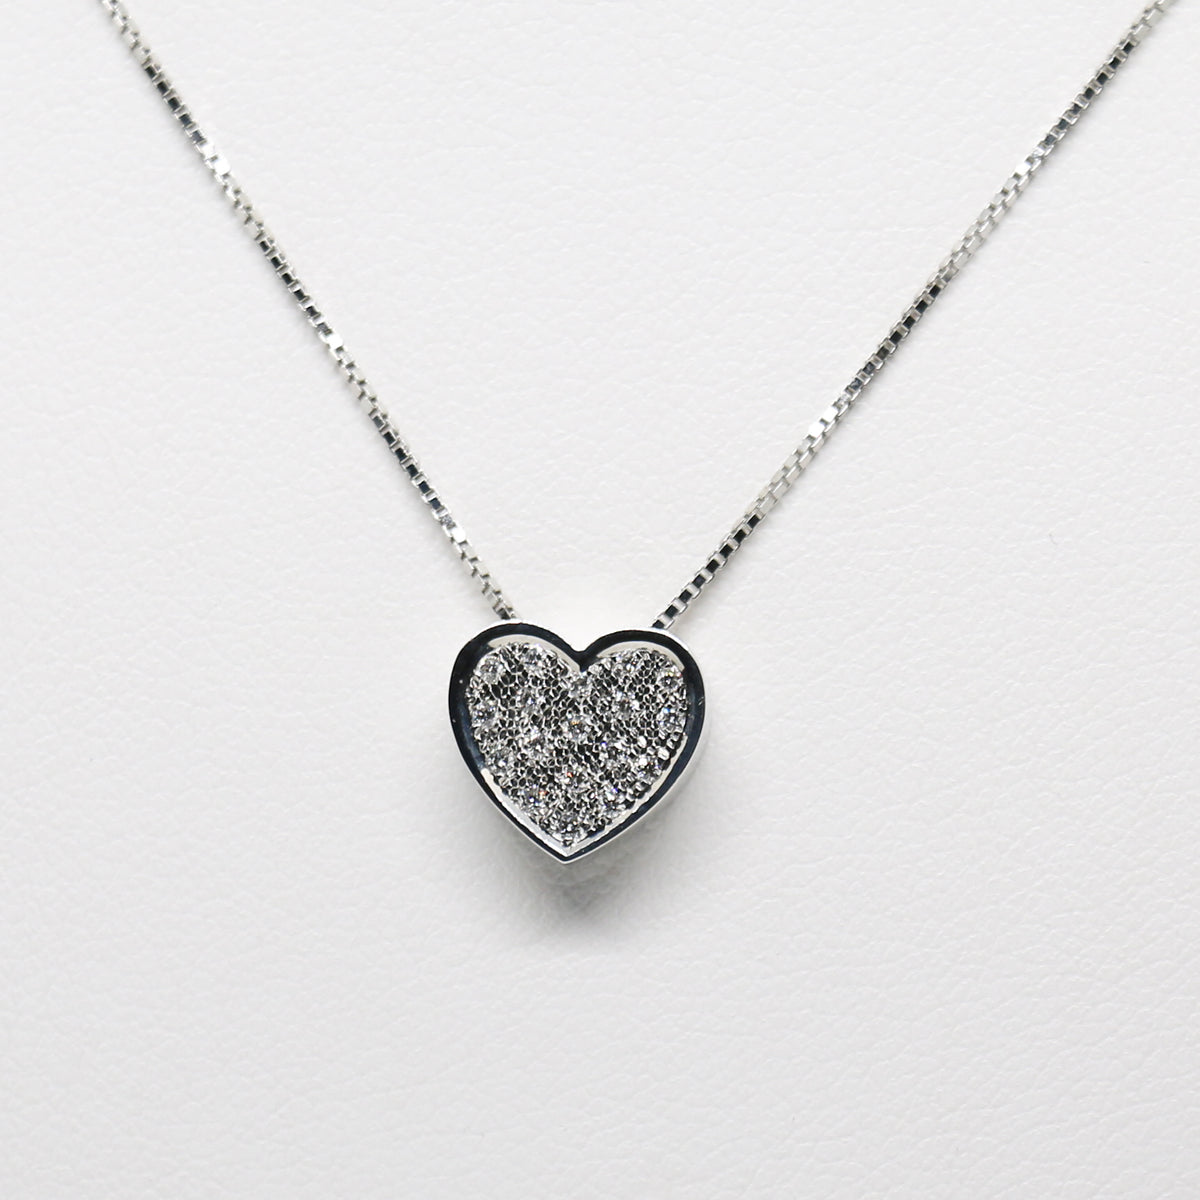 HEART white gold necklace with diamonds 0.8 ct SALVINI 20067541